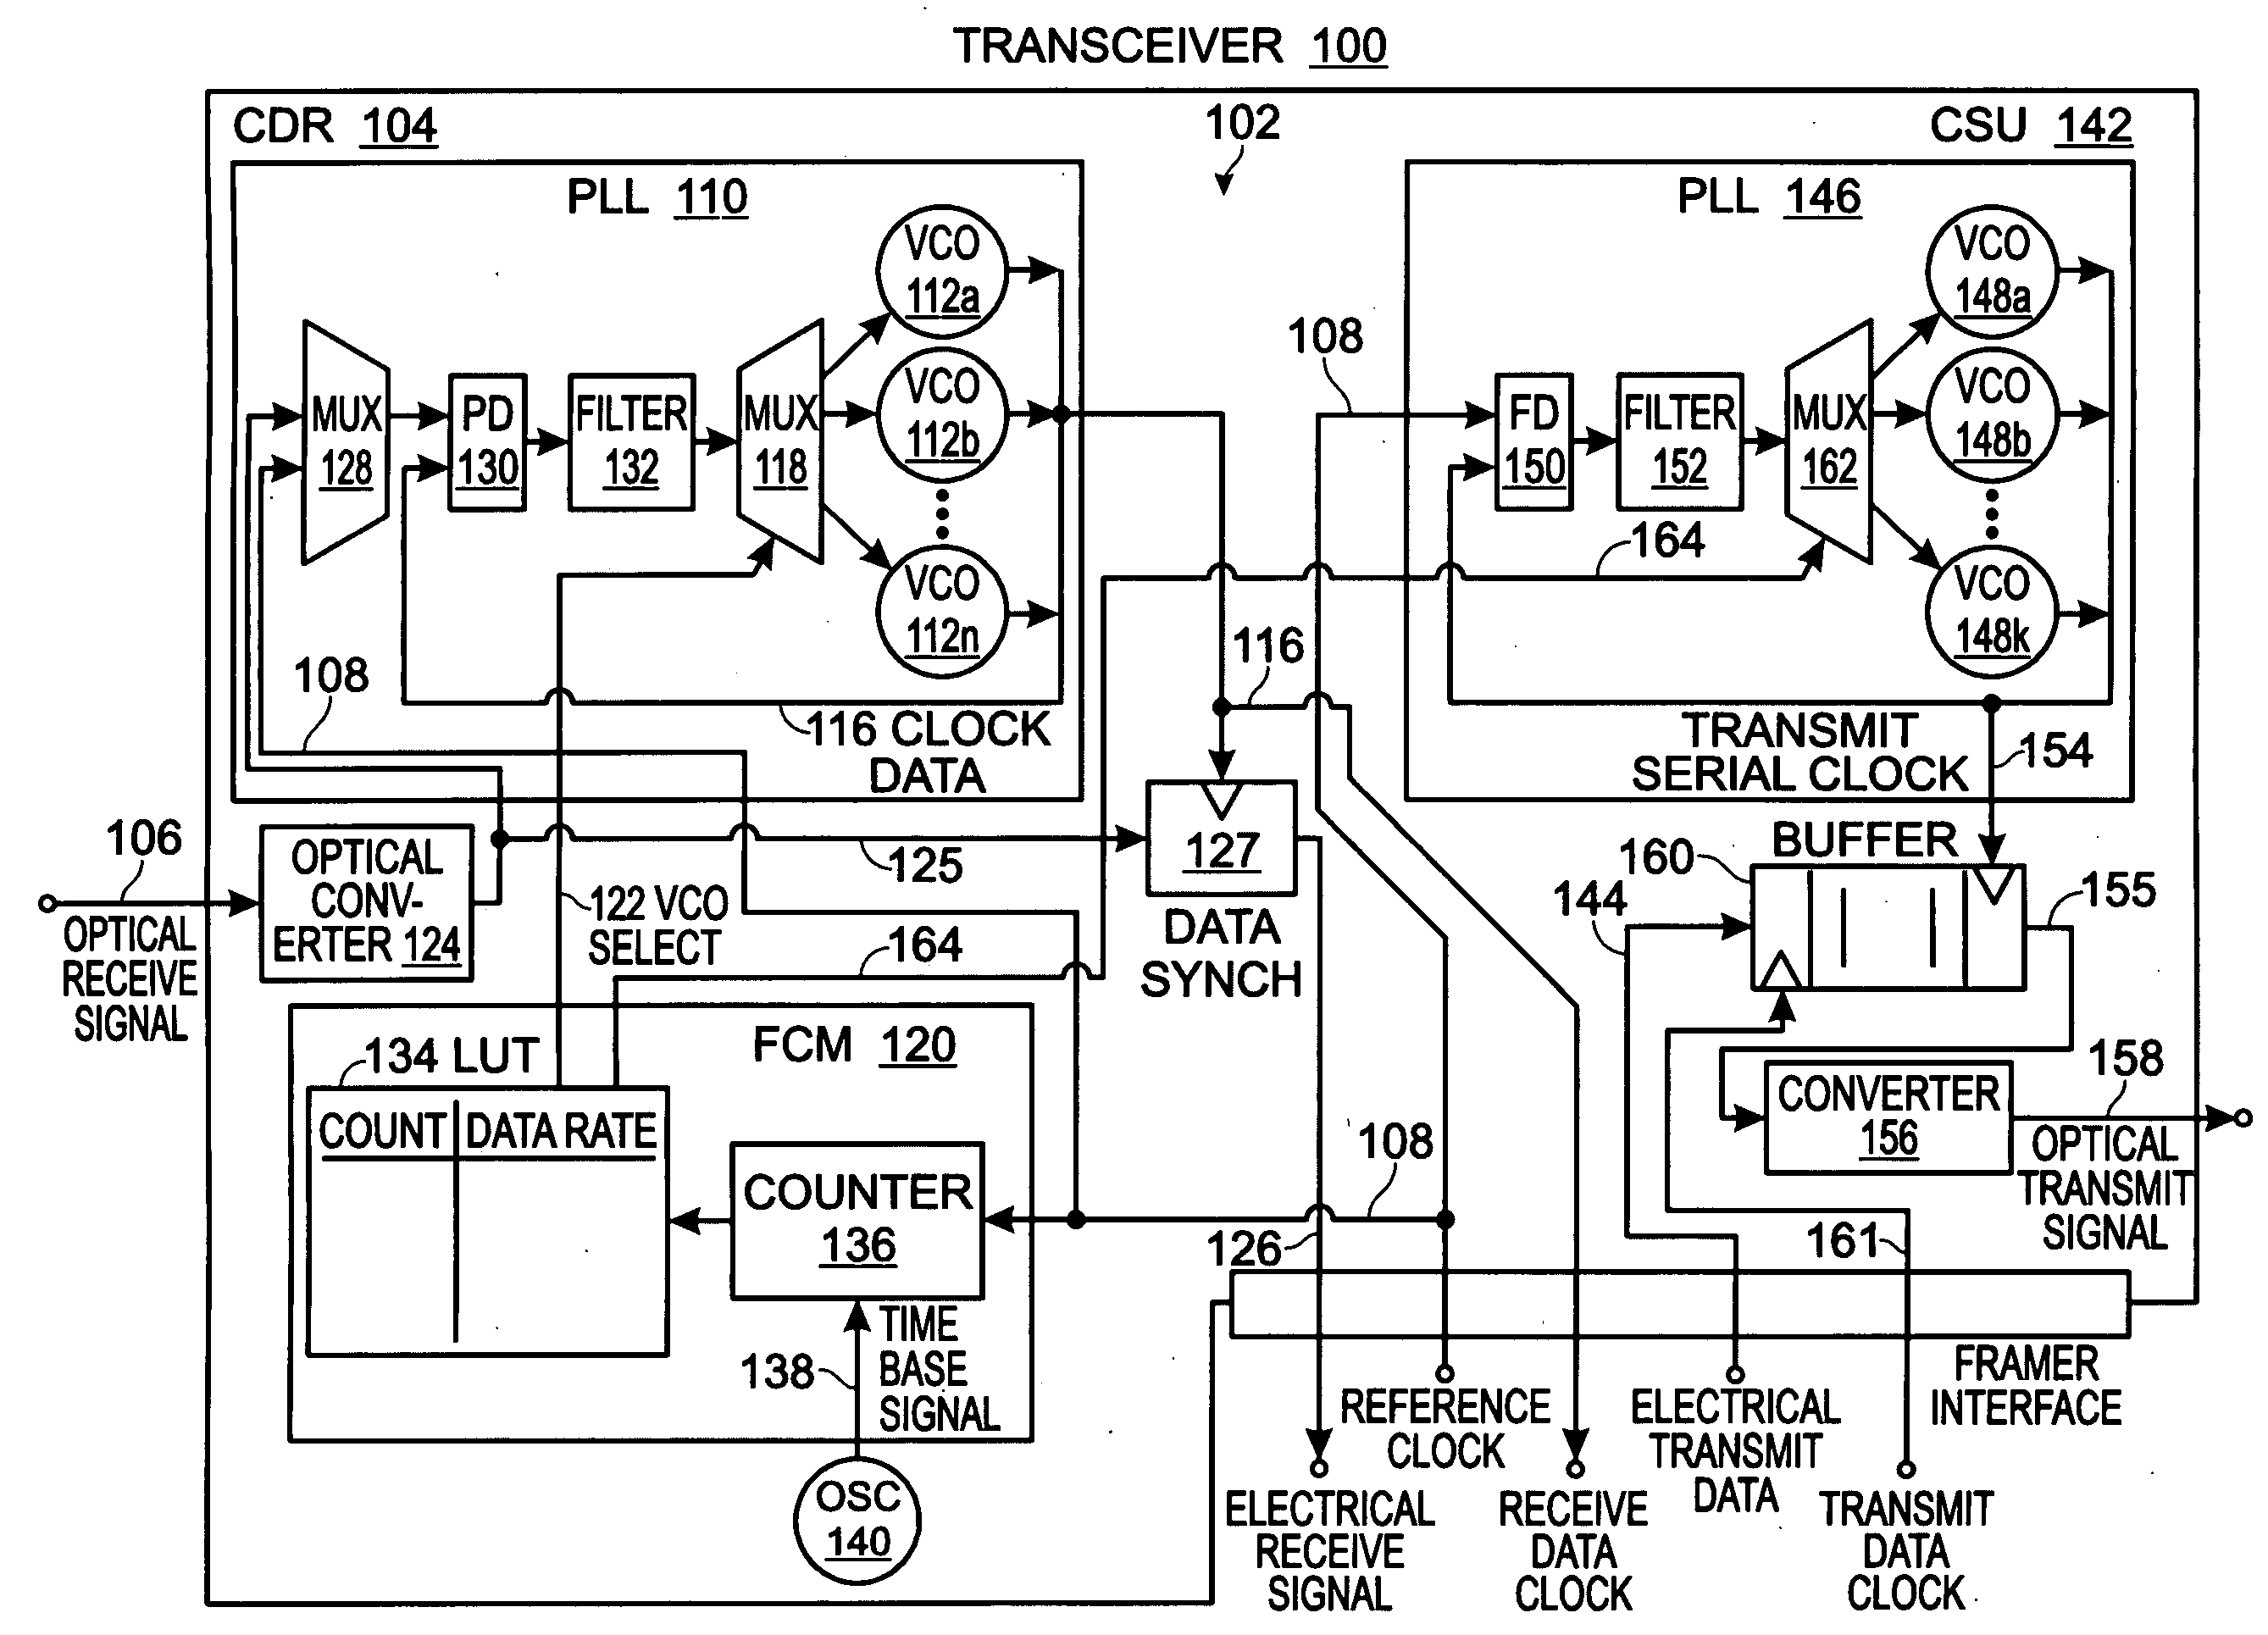 Reference Clock Rate Detection for Variable Rate Transceiver Modules